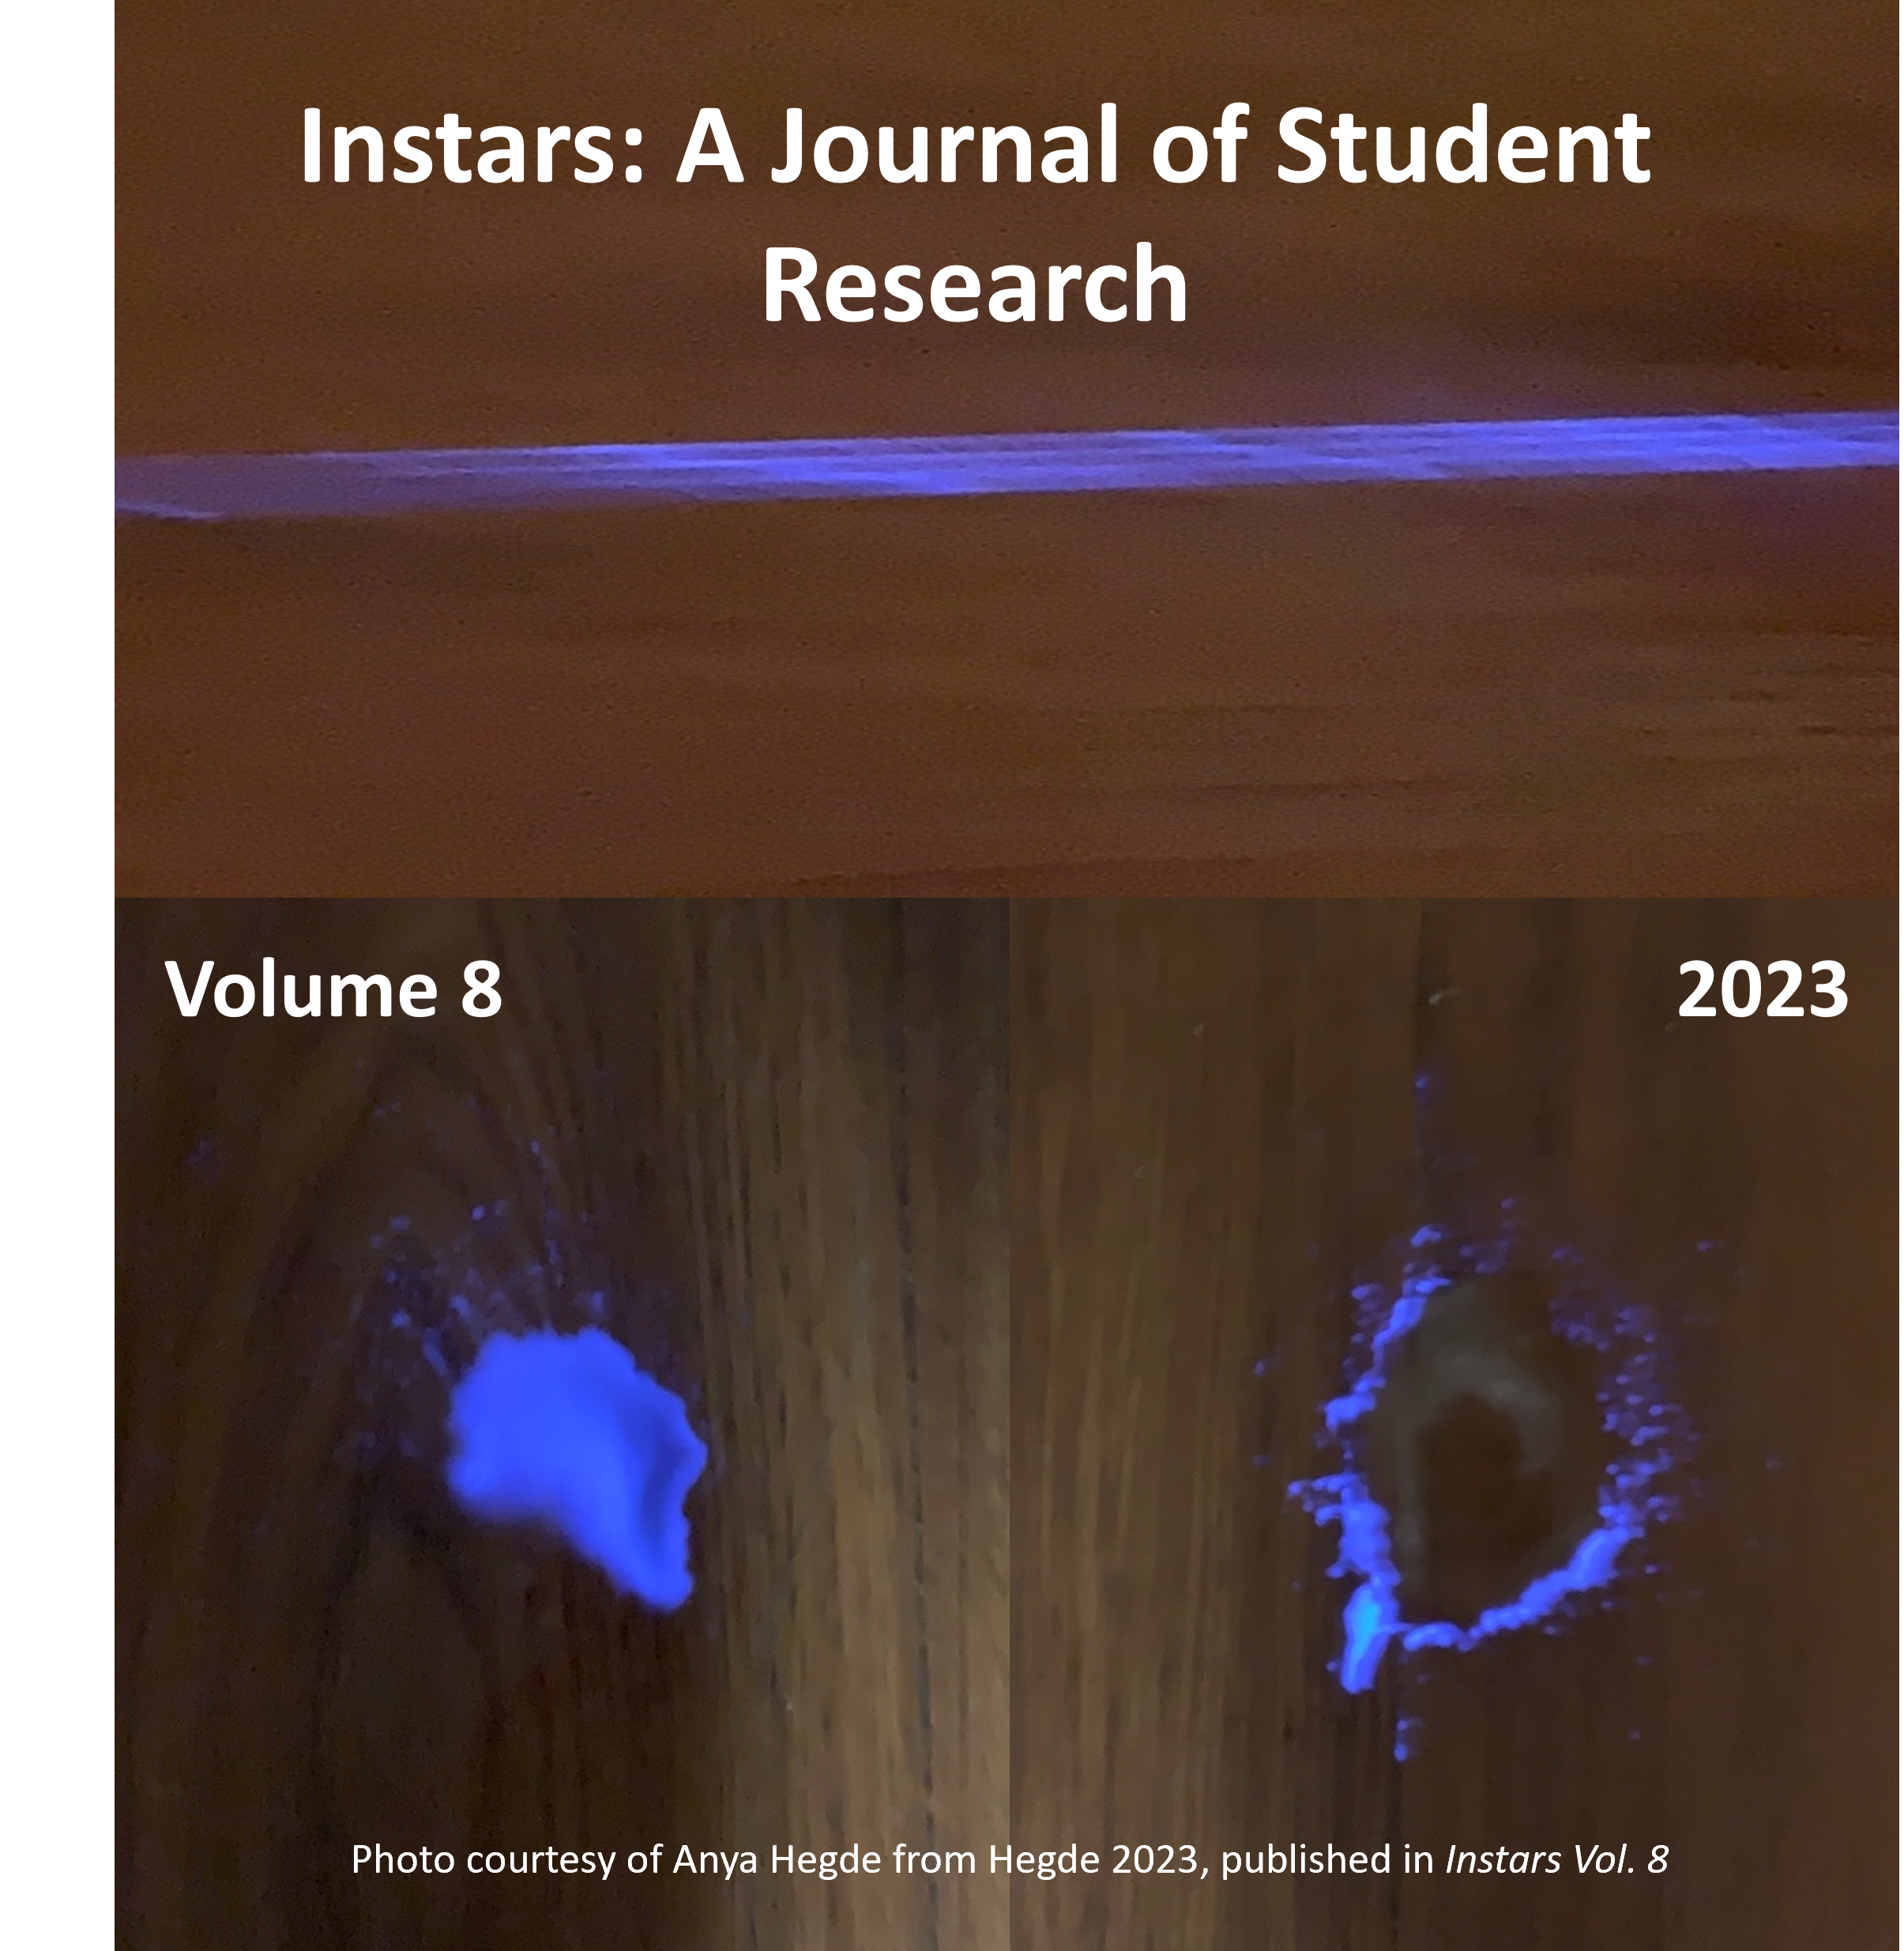 					View Vol. 8 No. 1 (2023): Instars: A Journal of Student Research
				